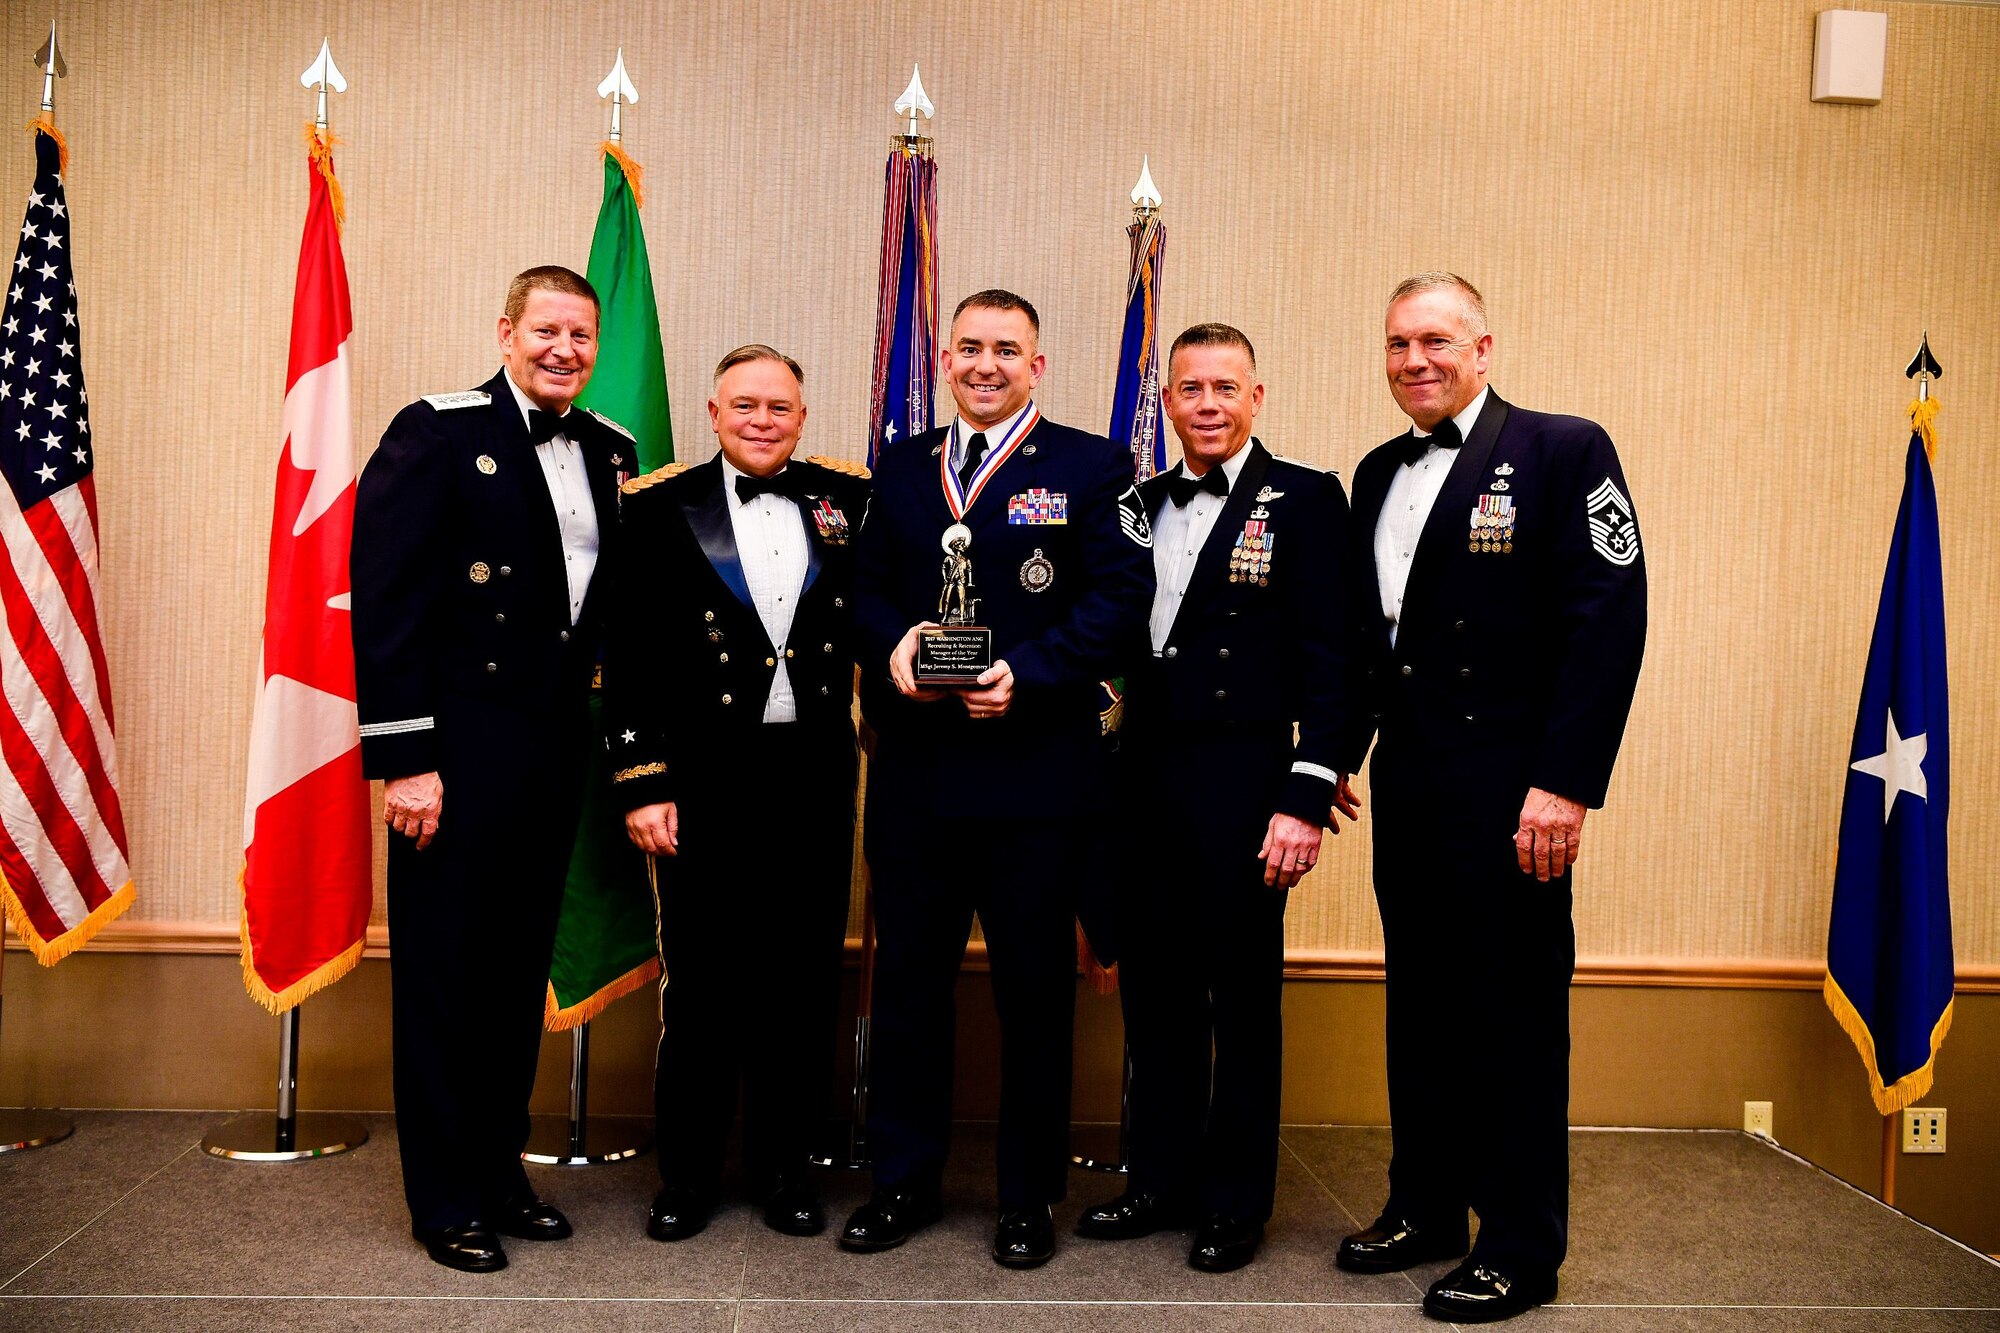 Master Sgt. Jeremy Montgomery, a recruiter with the Washington Air National Guard, is presented with the Recruiting and Retention Manager of the Year trophy at the Washington Air National Guard’s 9th Annual Awards Banquet held at the American Lake Conference Center on Joint Base Lewis-McChord, Washington, Jan. 27, 2018.  Montgomery was awarded the trophy for his outstanding contributions to the Washington Air National Guard over the last year.  Pictured from left to right are: Gen. Robin Rand, Air Force Global Strike Command and Air Forces Strategic-Air, U.S. Strategic Command commander; Maj. Gen. Bret Daugherty, Adjutant General of the Washington National Guard, Montgomery, Montgomery, Brig. Gen. Jeremy Horn, commander of the Washington Air National Guard, and Chief Master Sgt. Max Tidwell, Washington Air National Guard command chief. (U.S. Air National Guard photo by Tech. Sgt. Timothy Chacon)